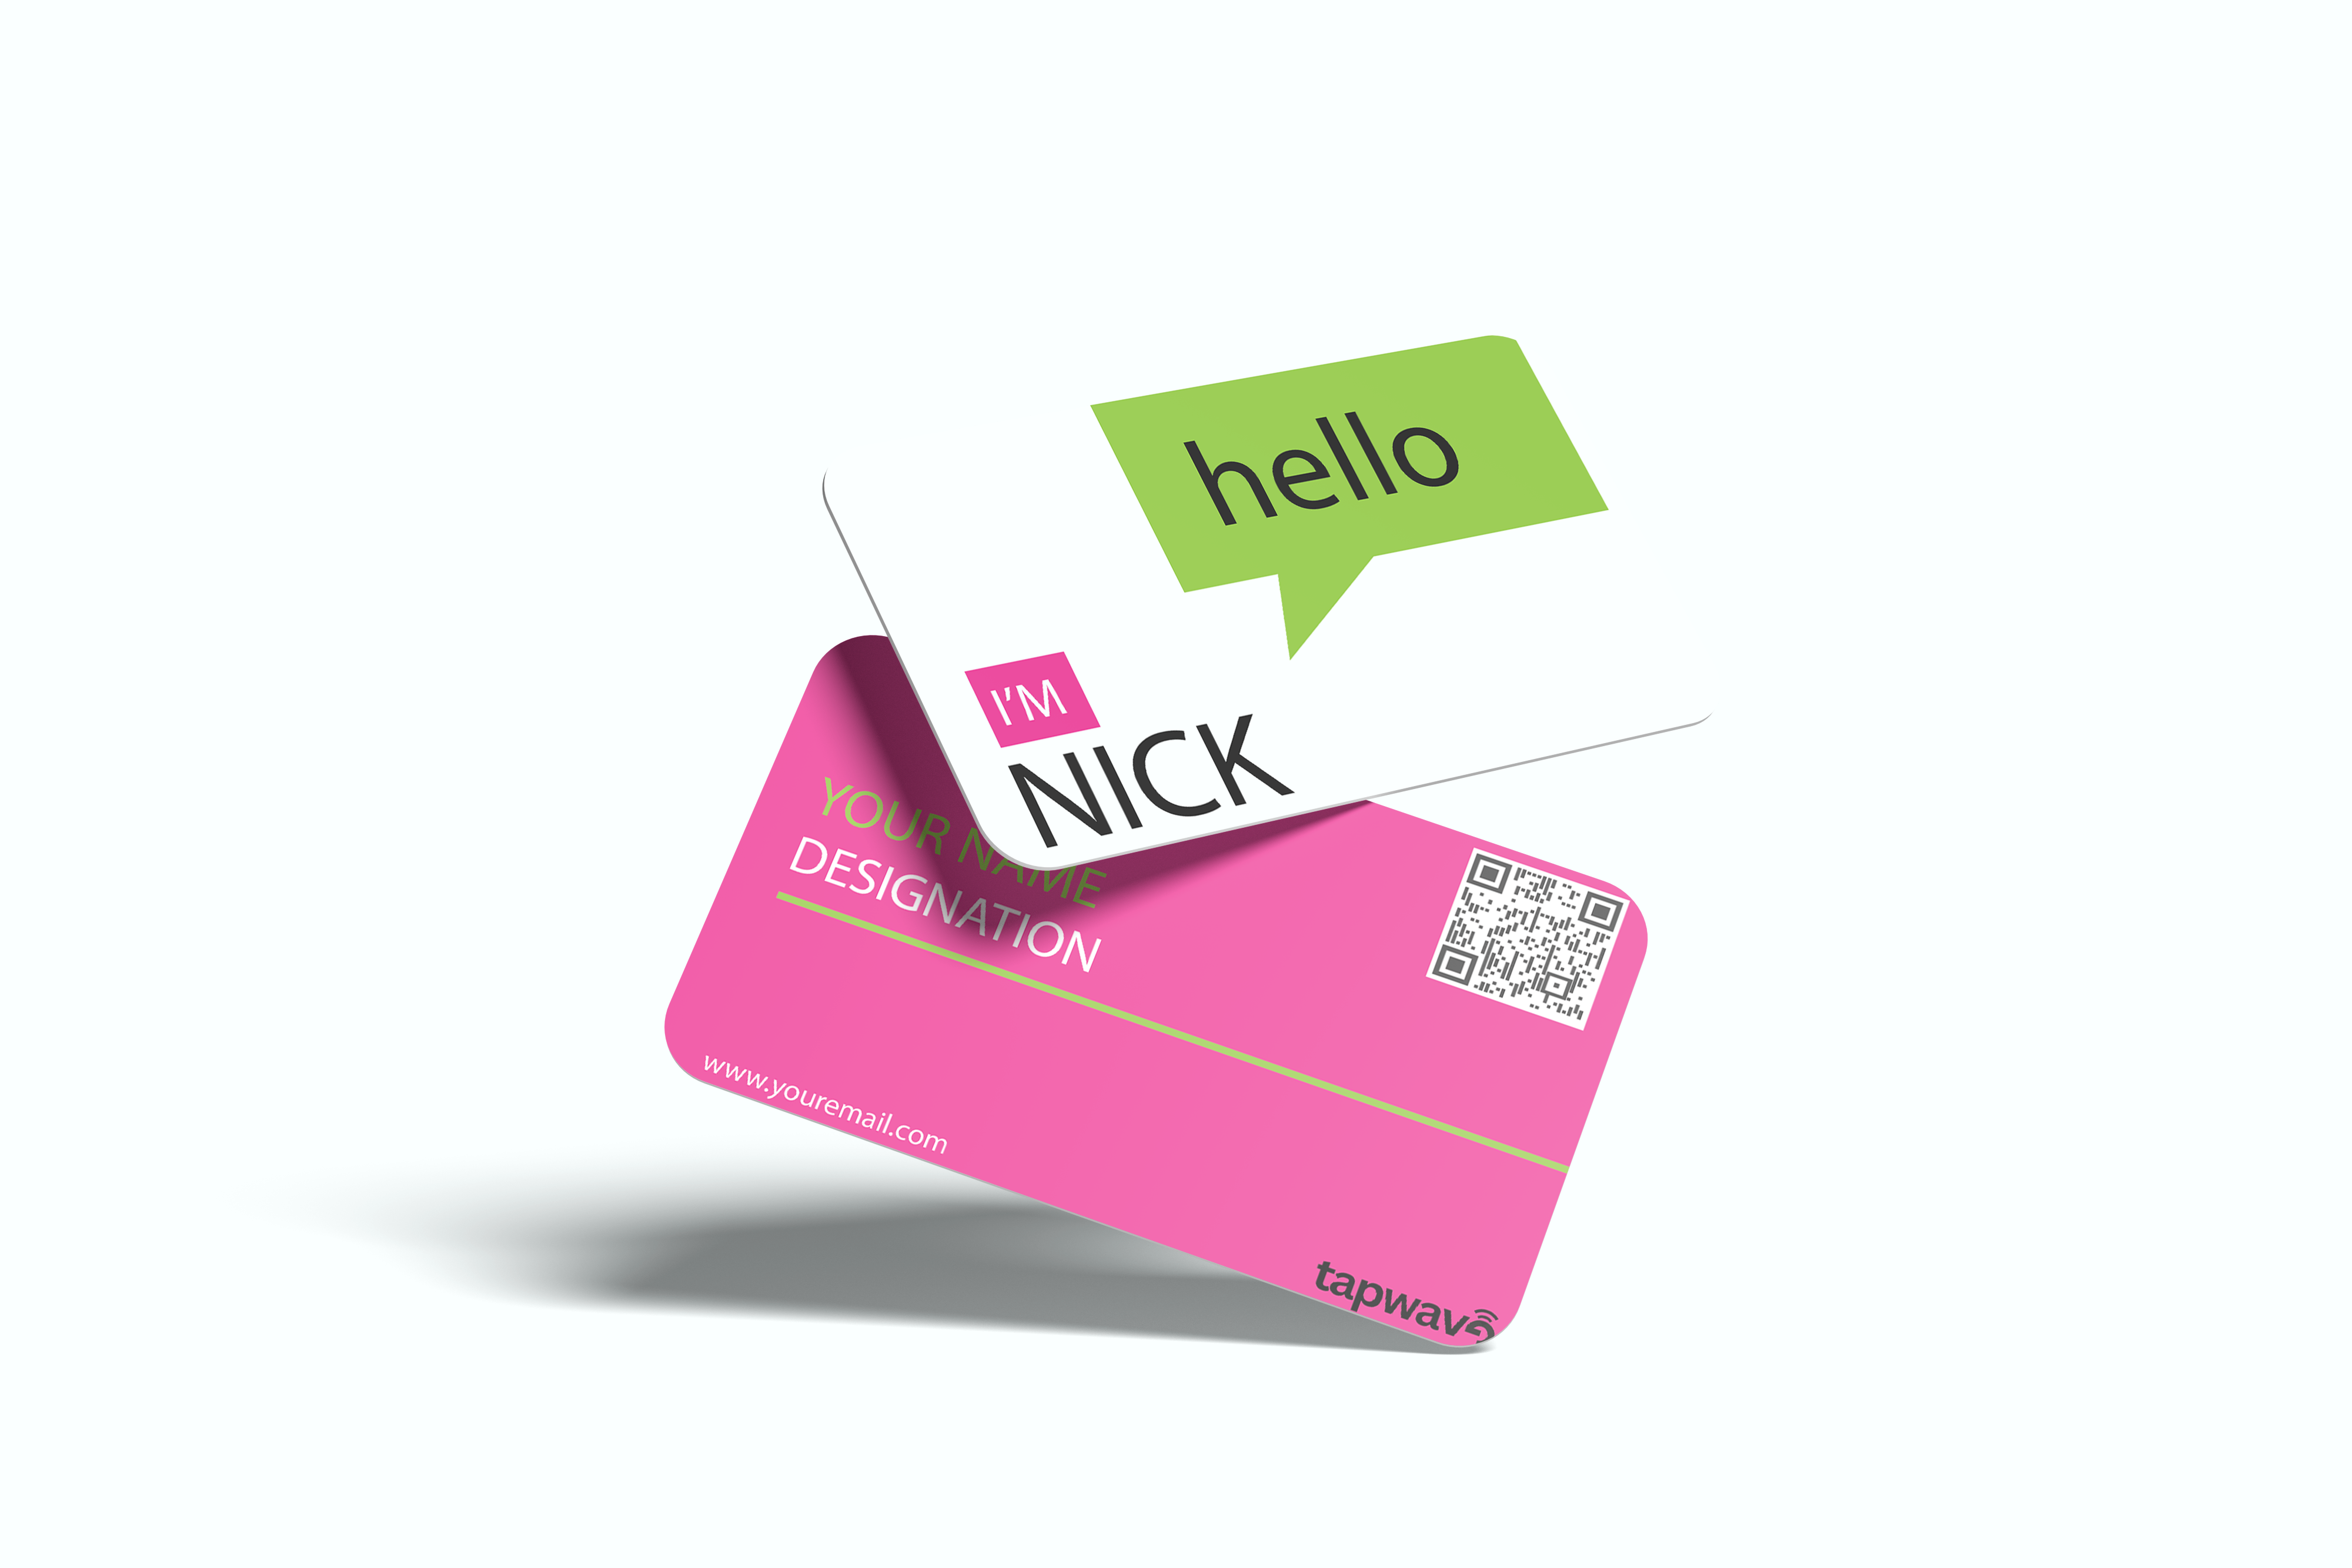 hi I am !!  Quote Tapwave  Nfc Business' Card